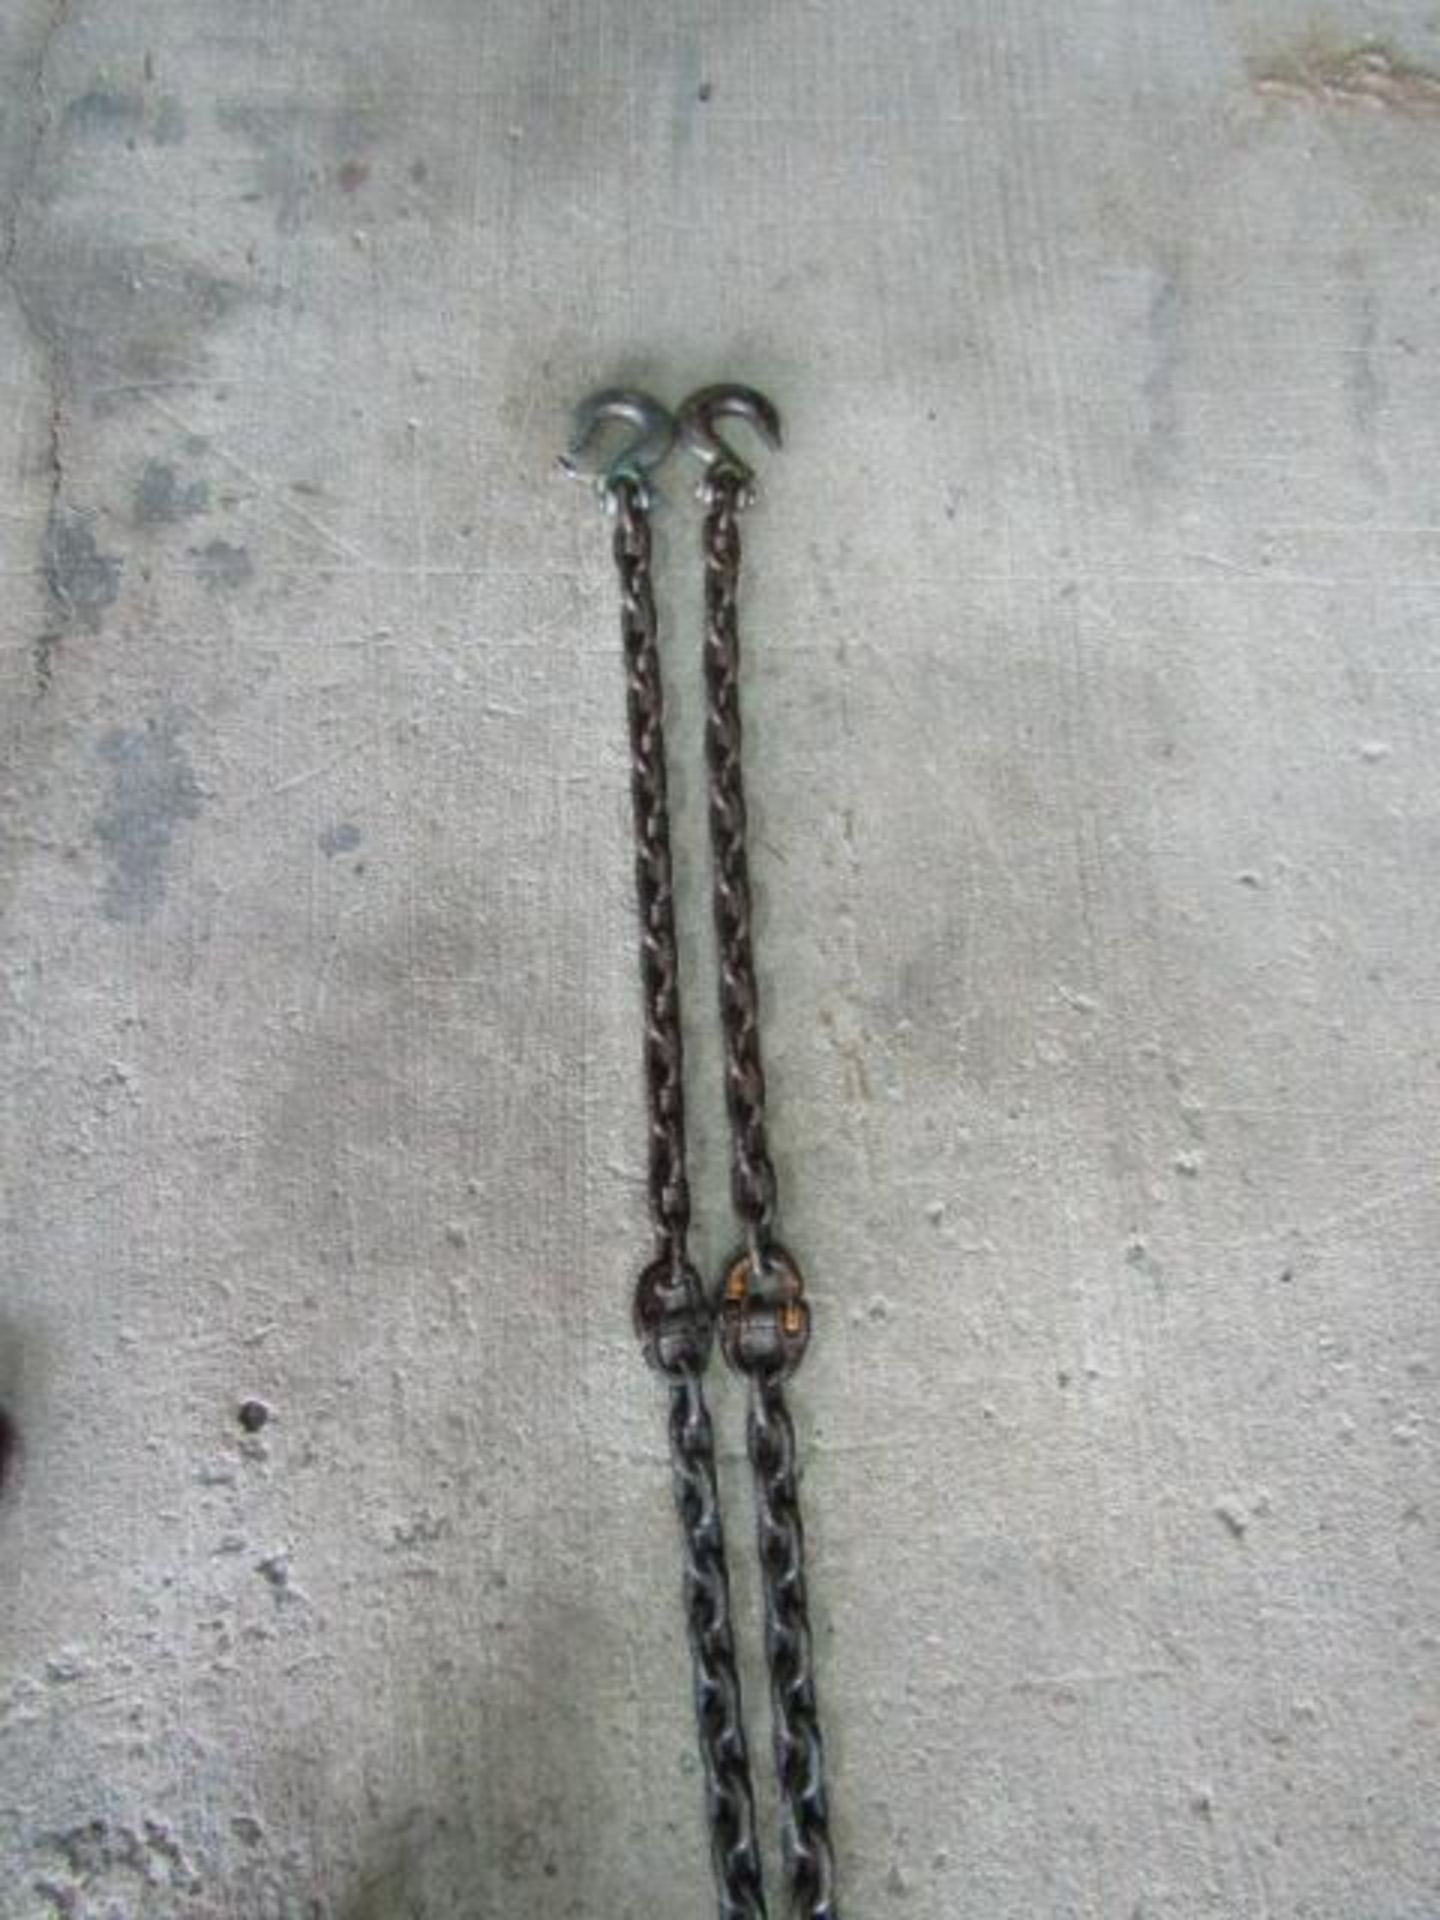 2 Leg 14' Chain with Hooks - Image 2 of 3